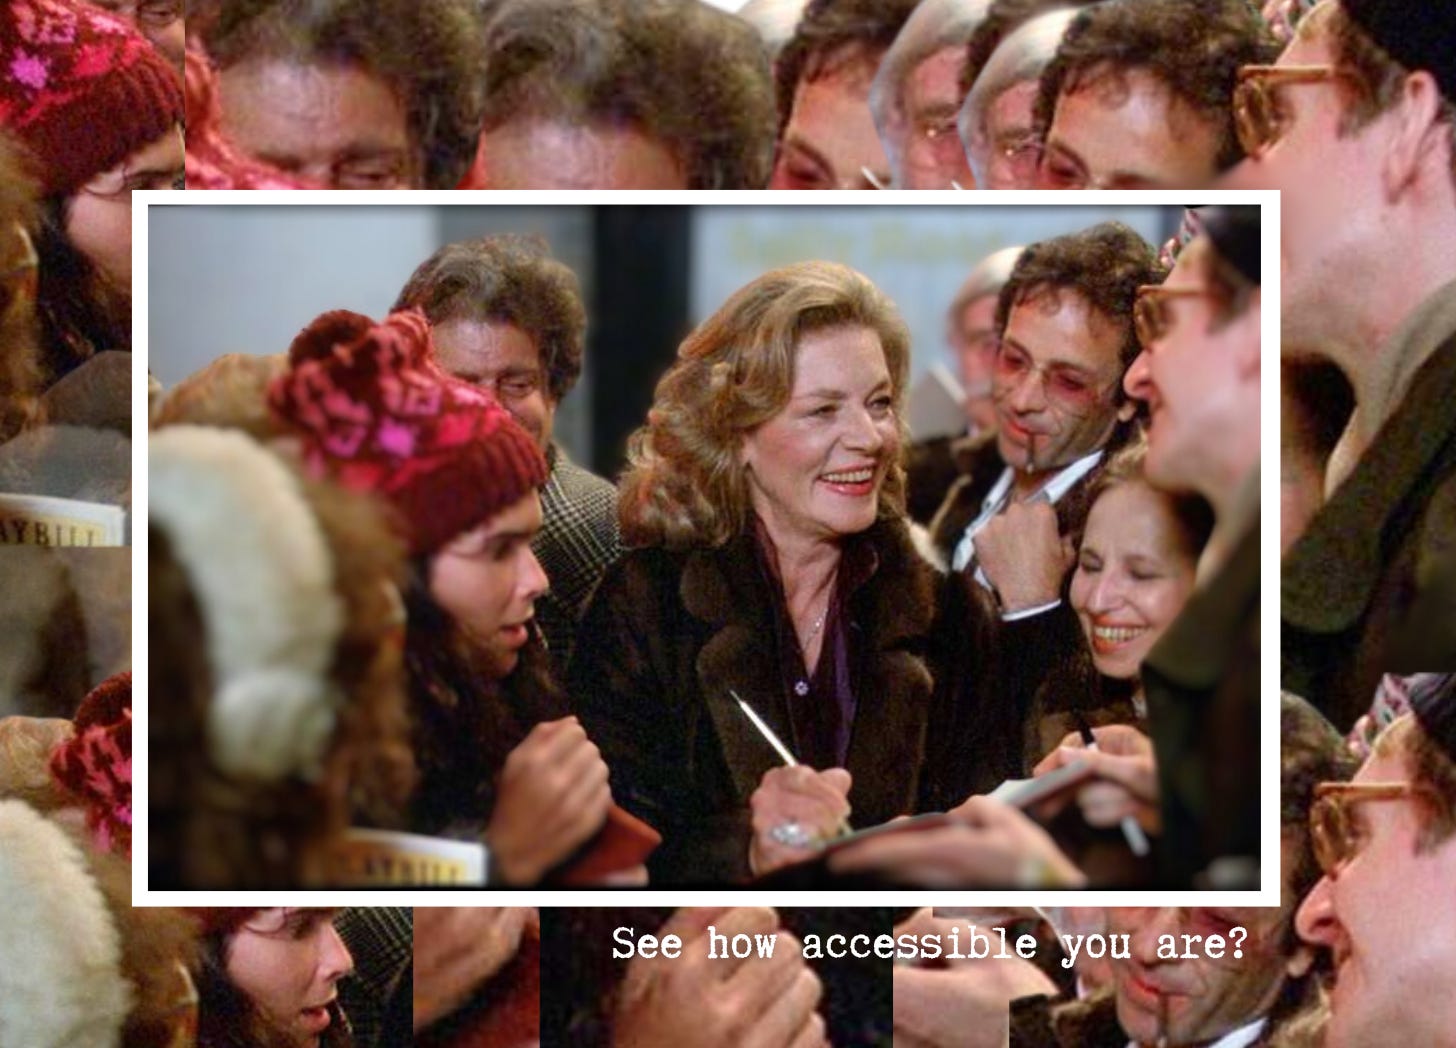 A photo of Lauren Bacall signing autographs surrounded by cutouts of her adoring fans multiplied. White text reads "See how accessible you are?"